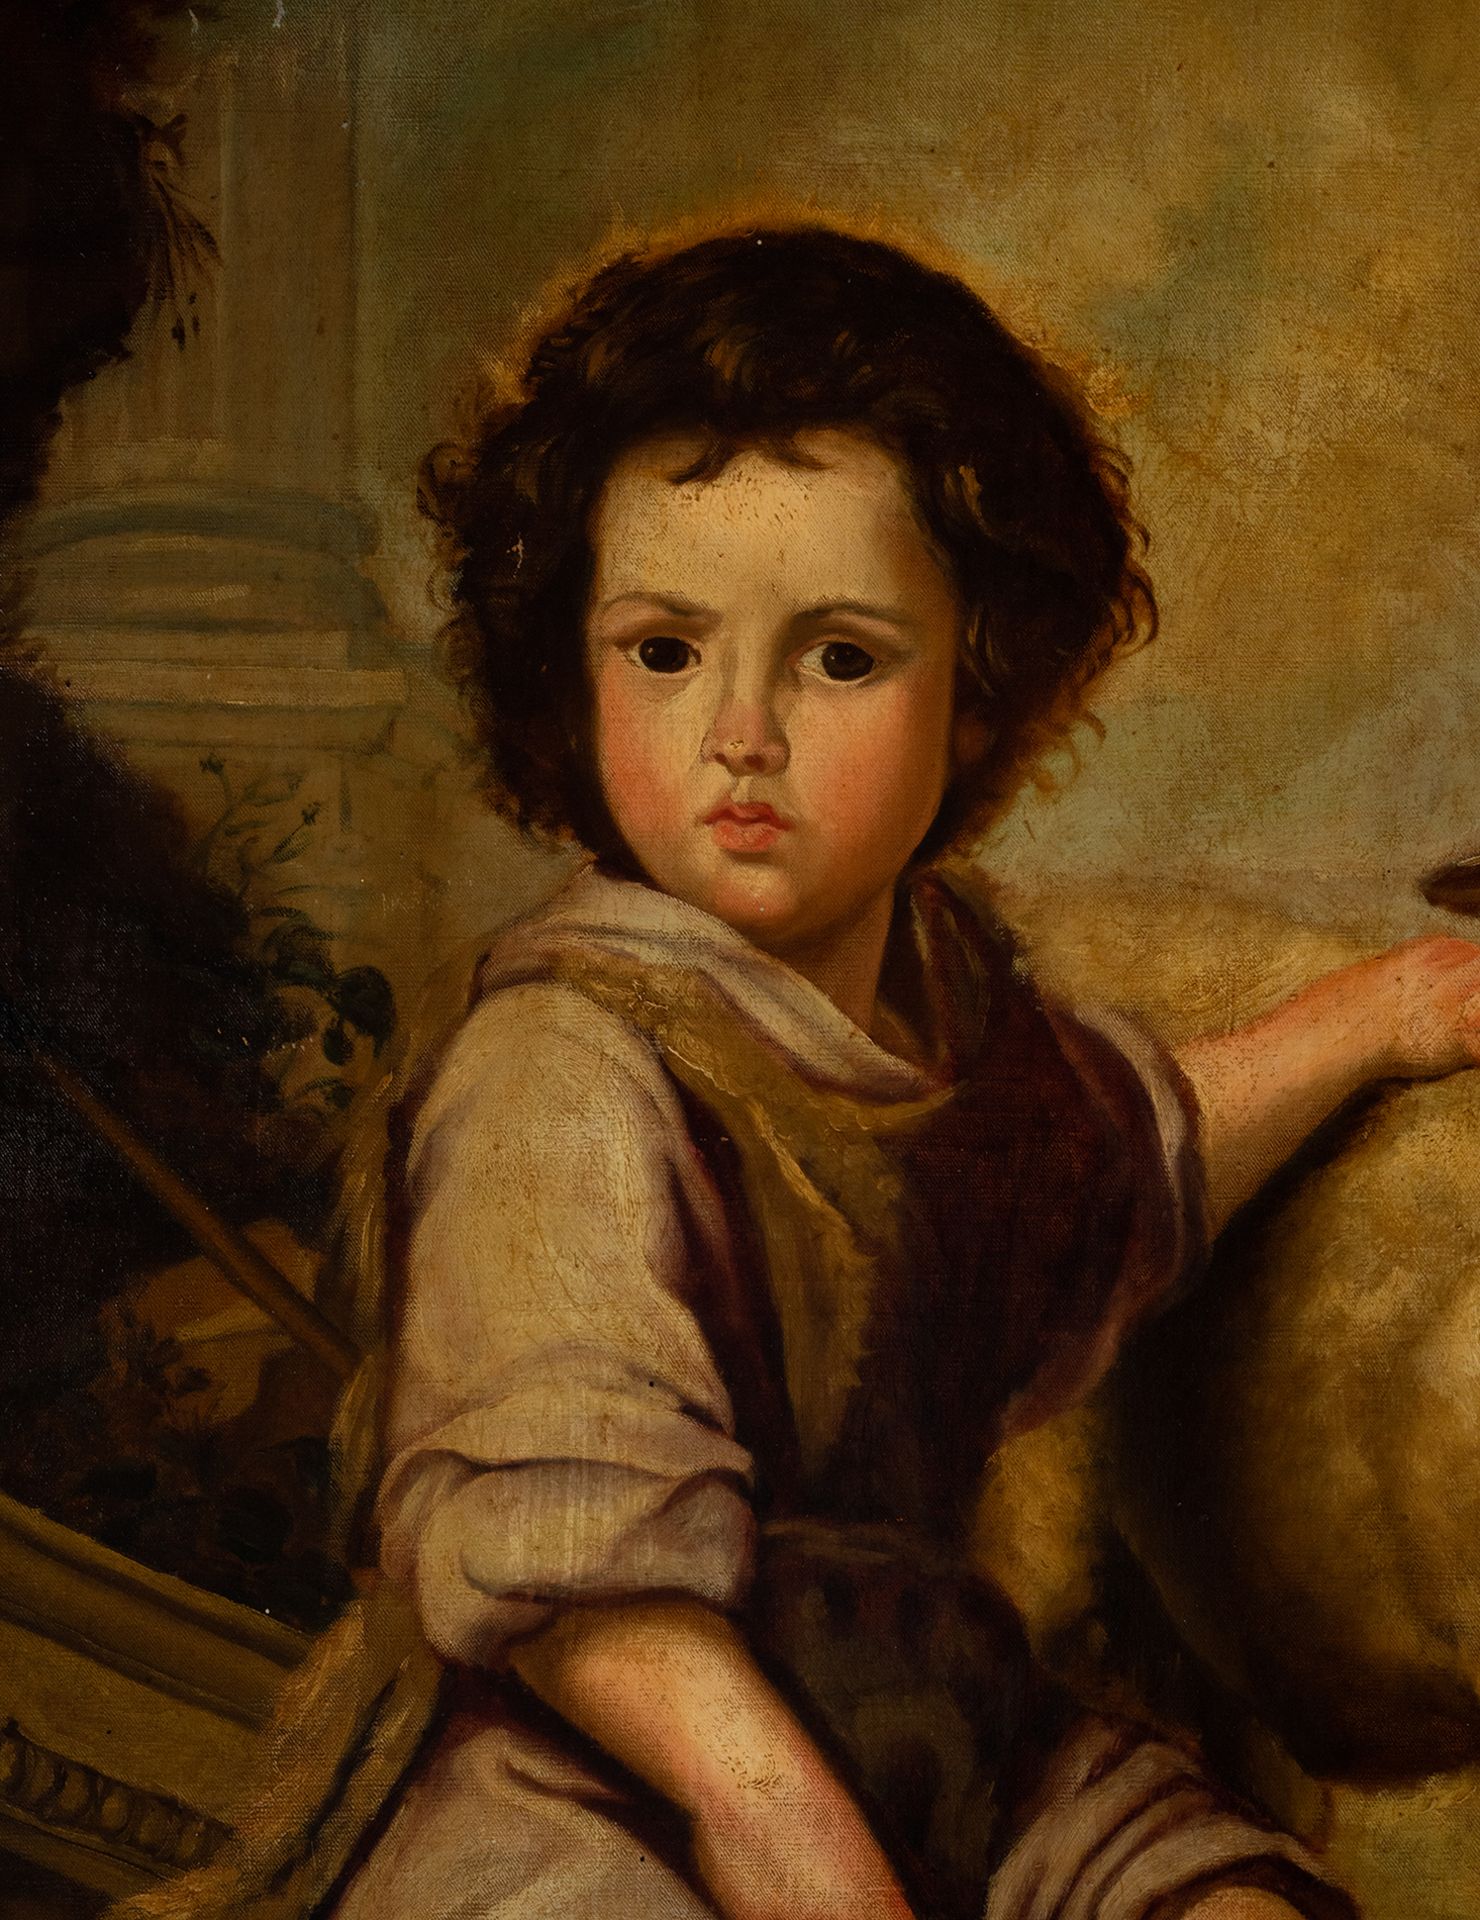 The Good Shepherd, following the models of Bartolomé Esteban Murillo, English school of the 18th - 1 - Image 2 of 5